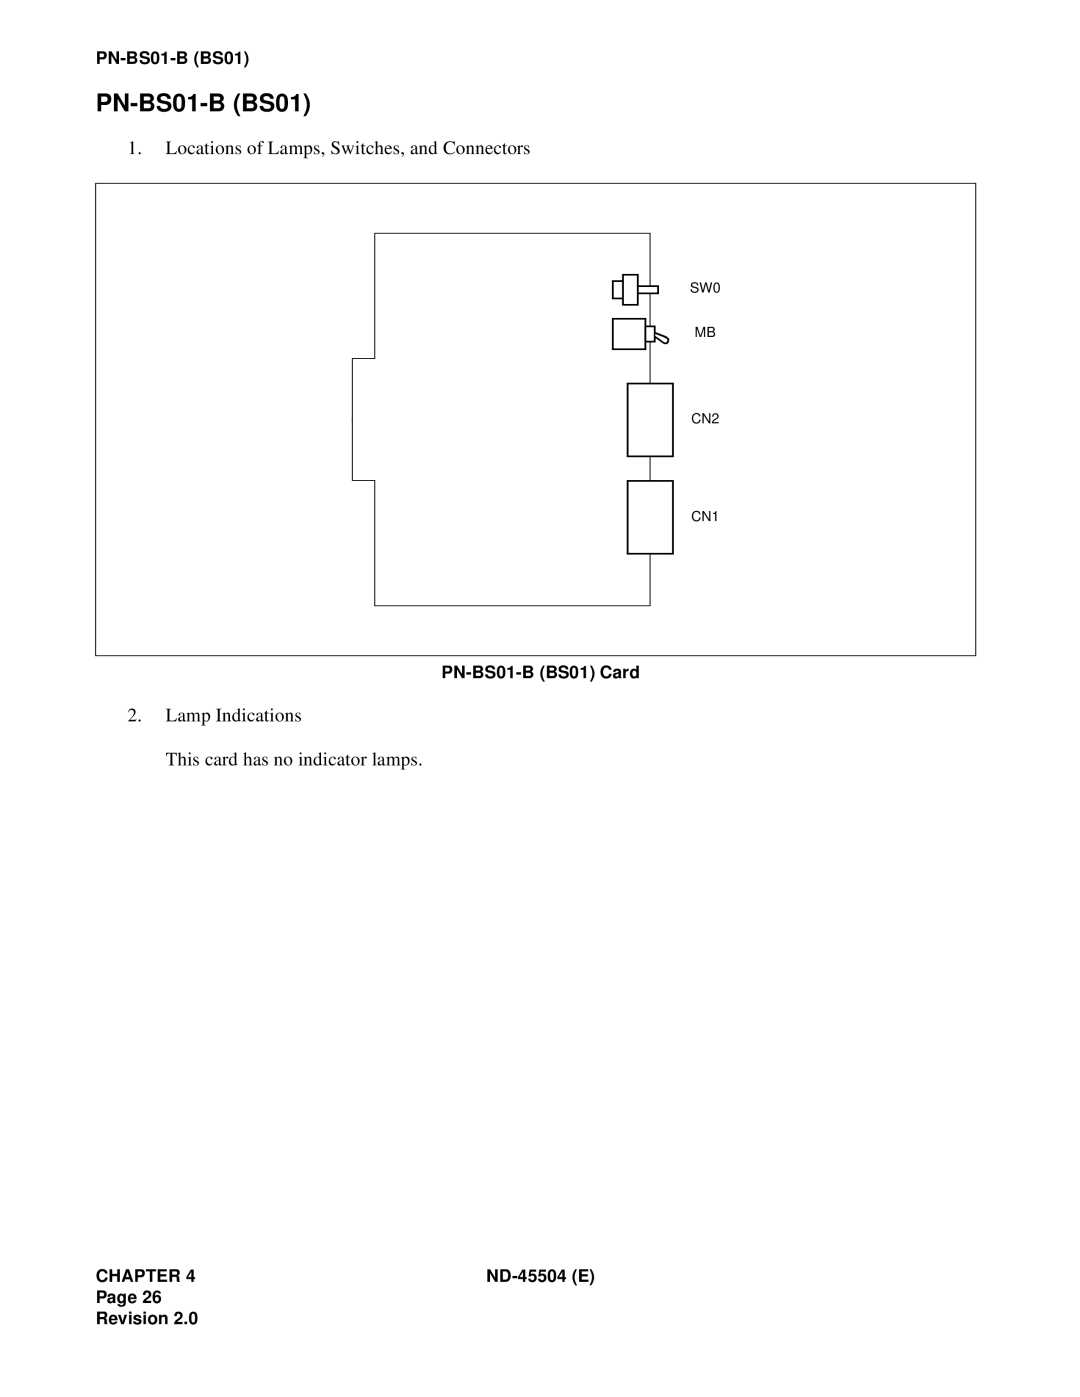 NEC 2000 IVS Locations of Lamps, Switches, and Connectors, Lamp Indications, PN-BS01-BBS01 Card, Chapter, ND-45504E 